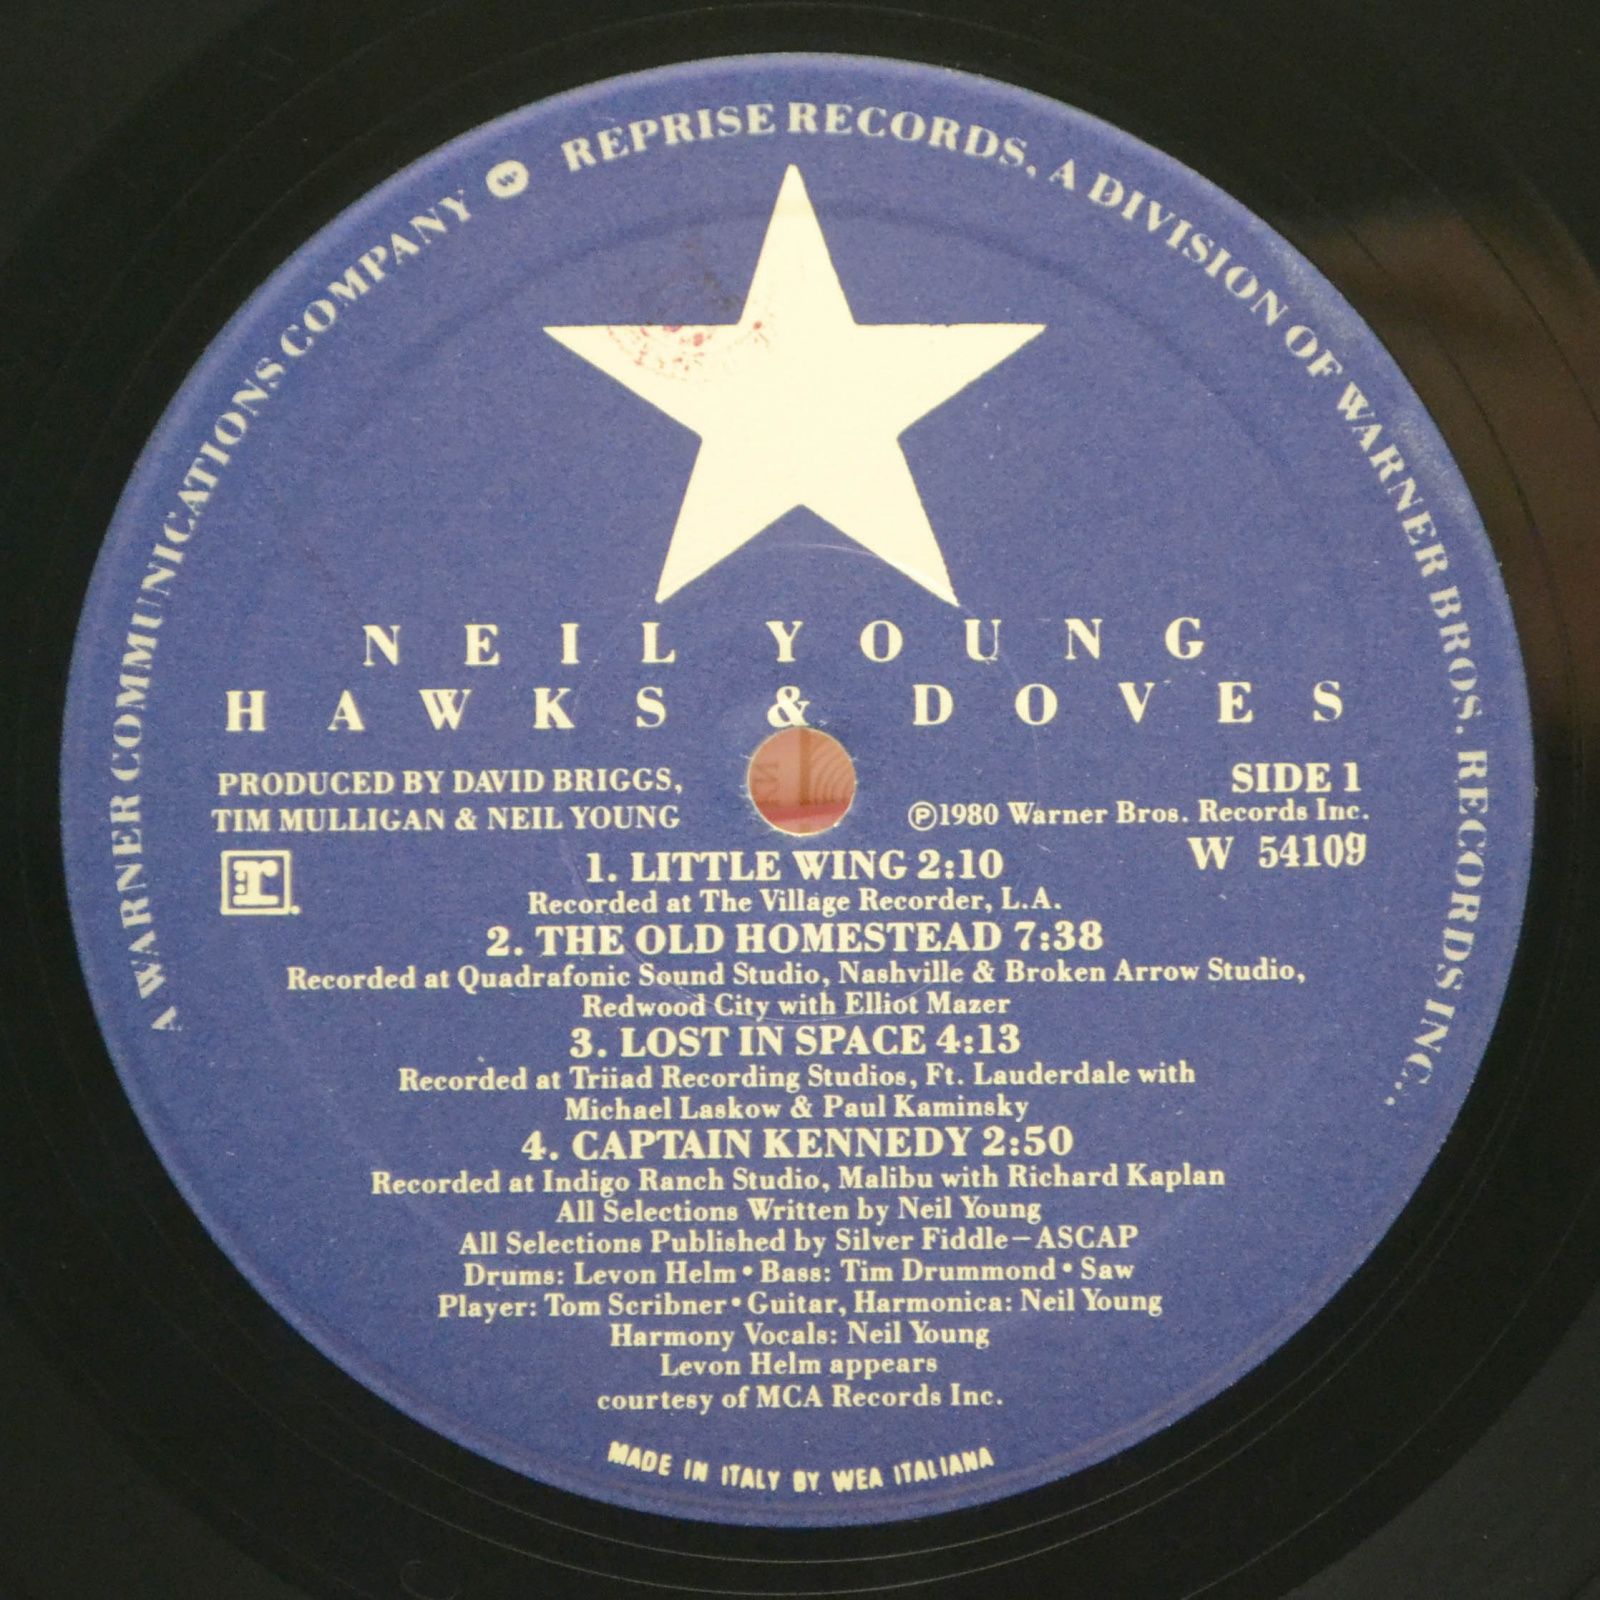 Neil Young — Hawks & Doves, 1980